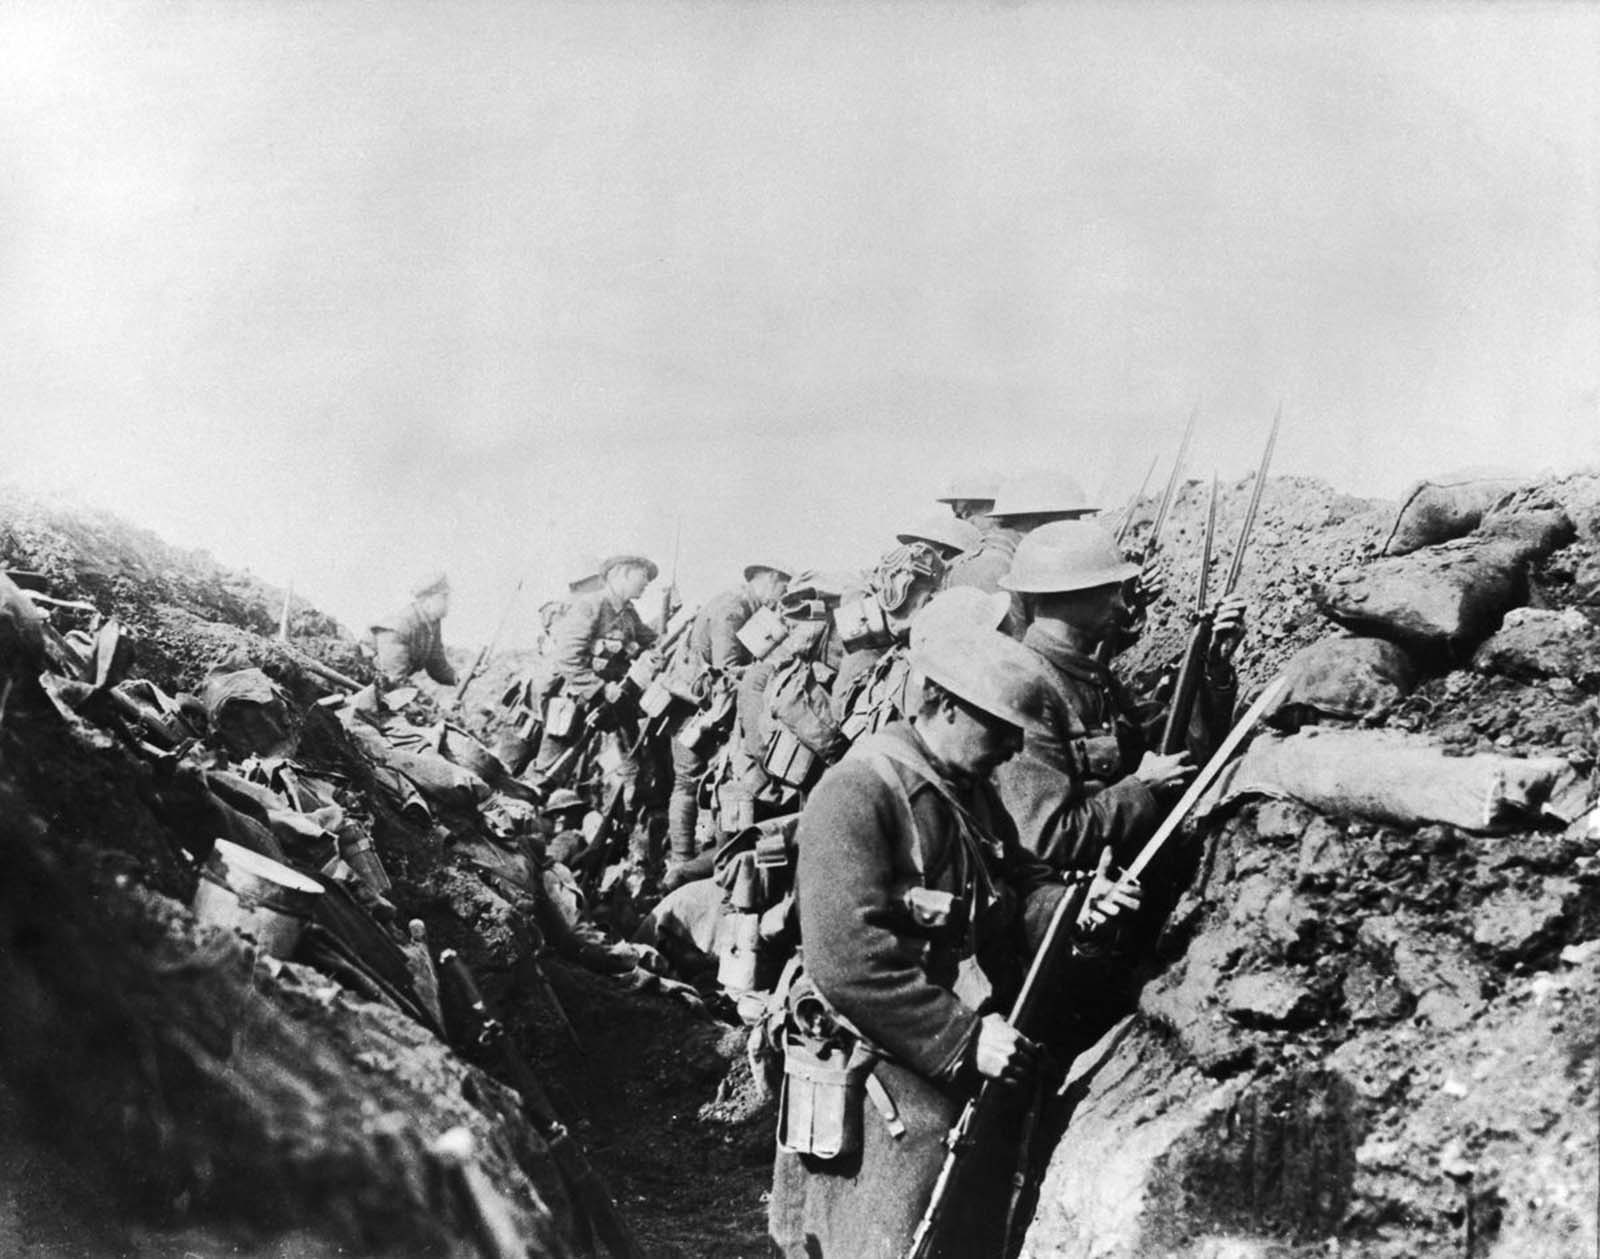 Canadian troops fix bayonets before going over the top to assault German positions.